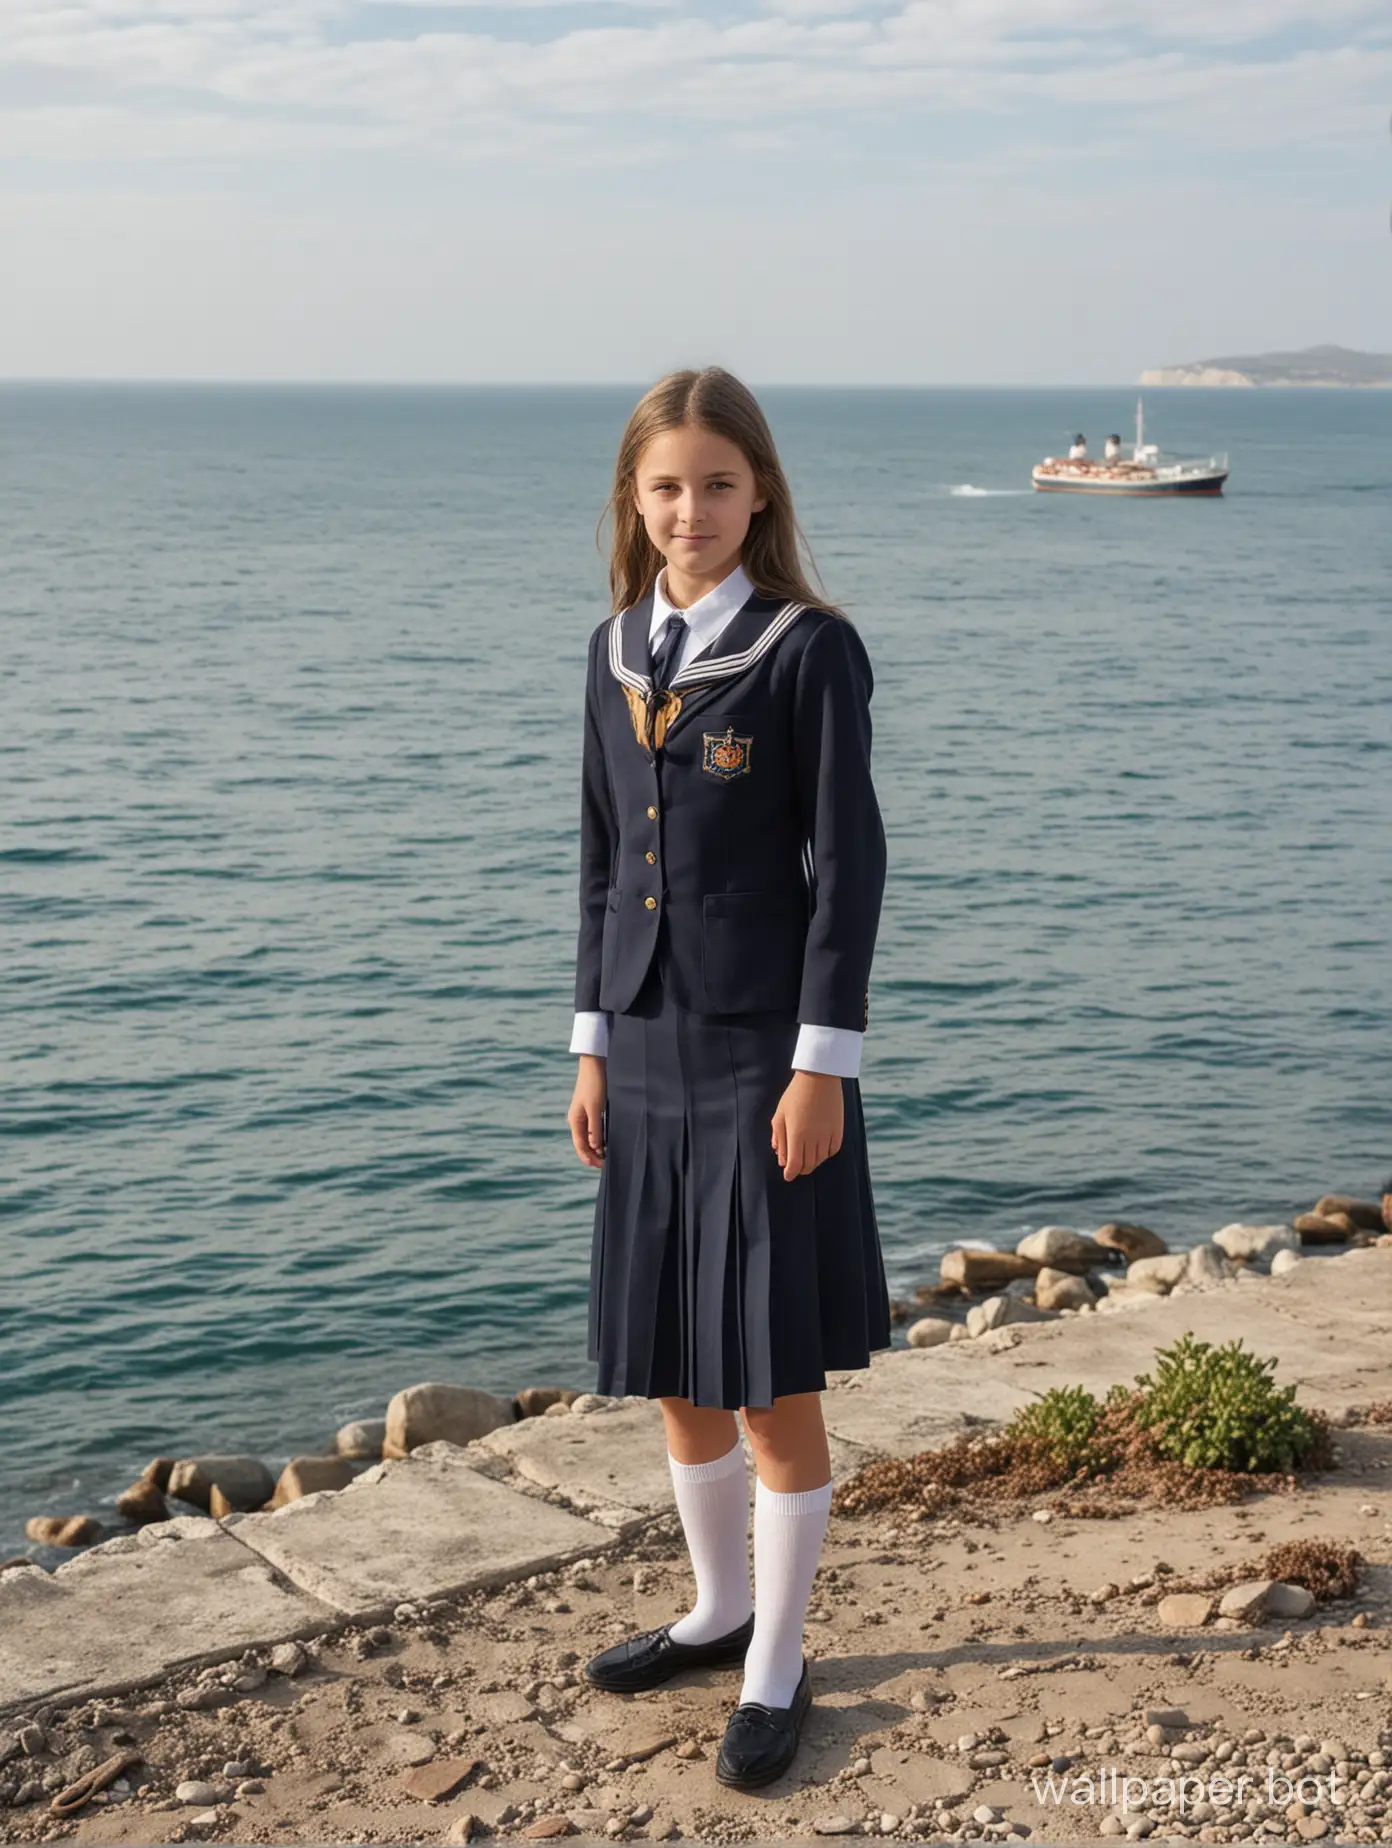 Crimea-Girl-in-School-Uniform-Gazing-at-Distant-Ship-by-the-Sea